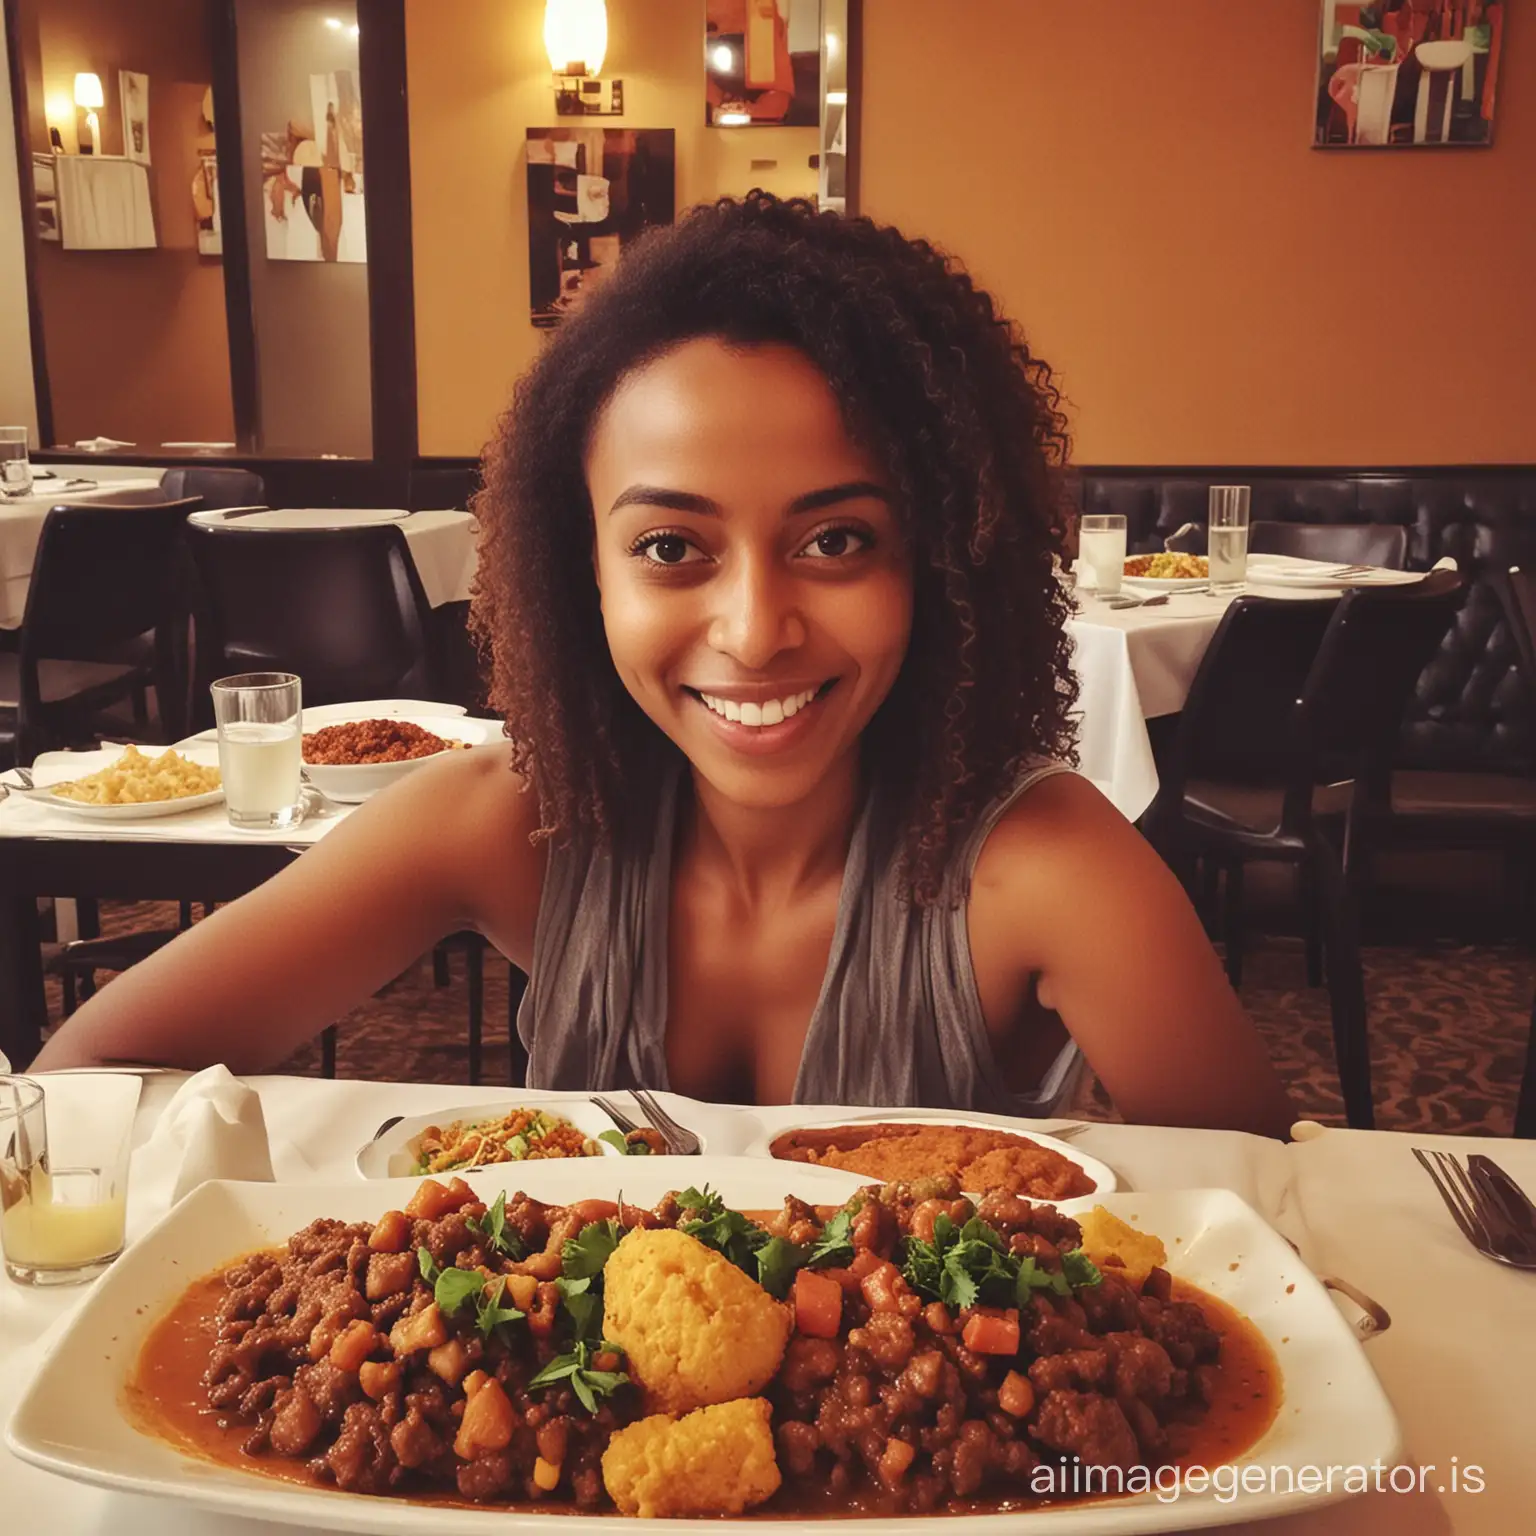 ETHIOPIAN FOOD REVIEWER HAVING FUN AND SELFIE WITH DELICIOUS FOOD AT THE MODERN HOTEL